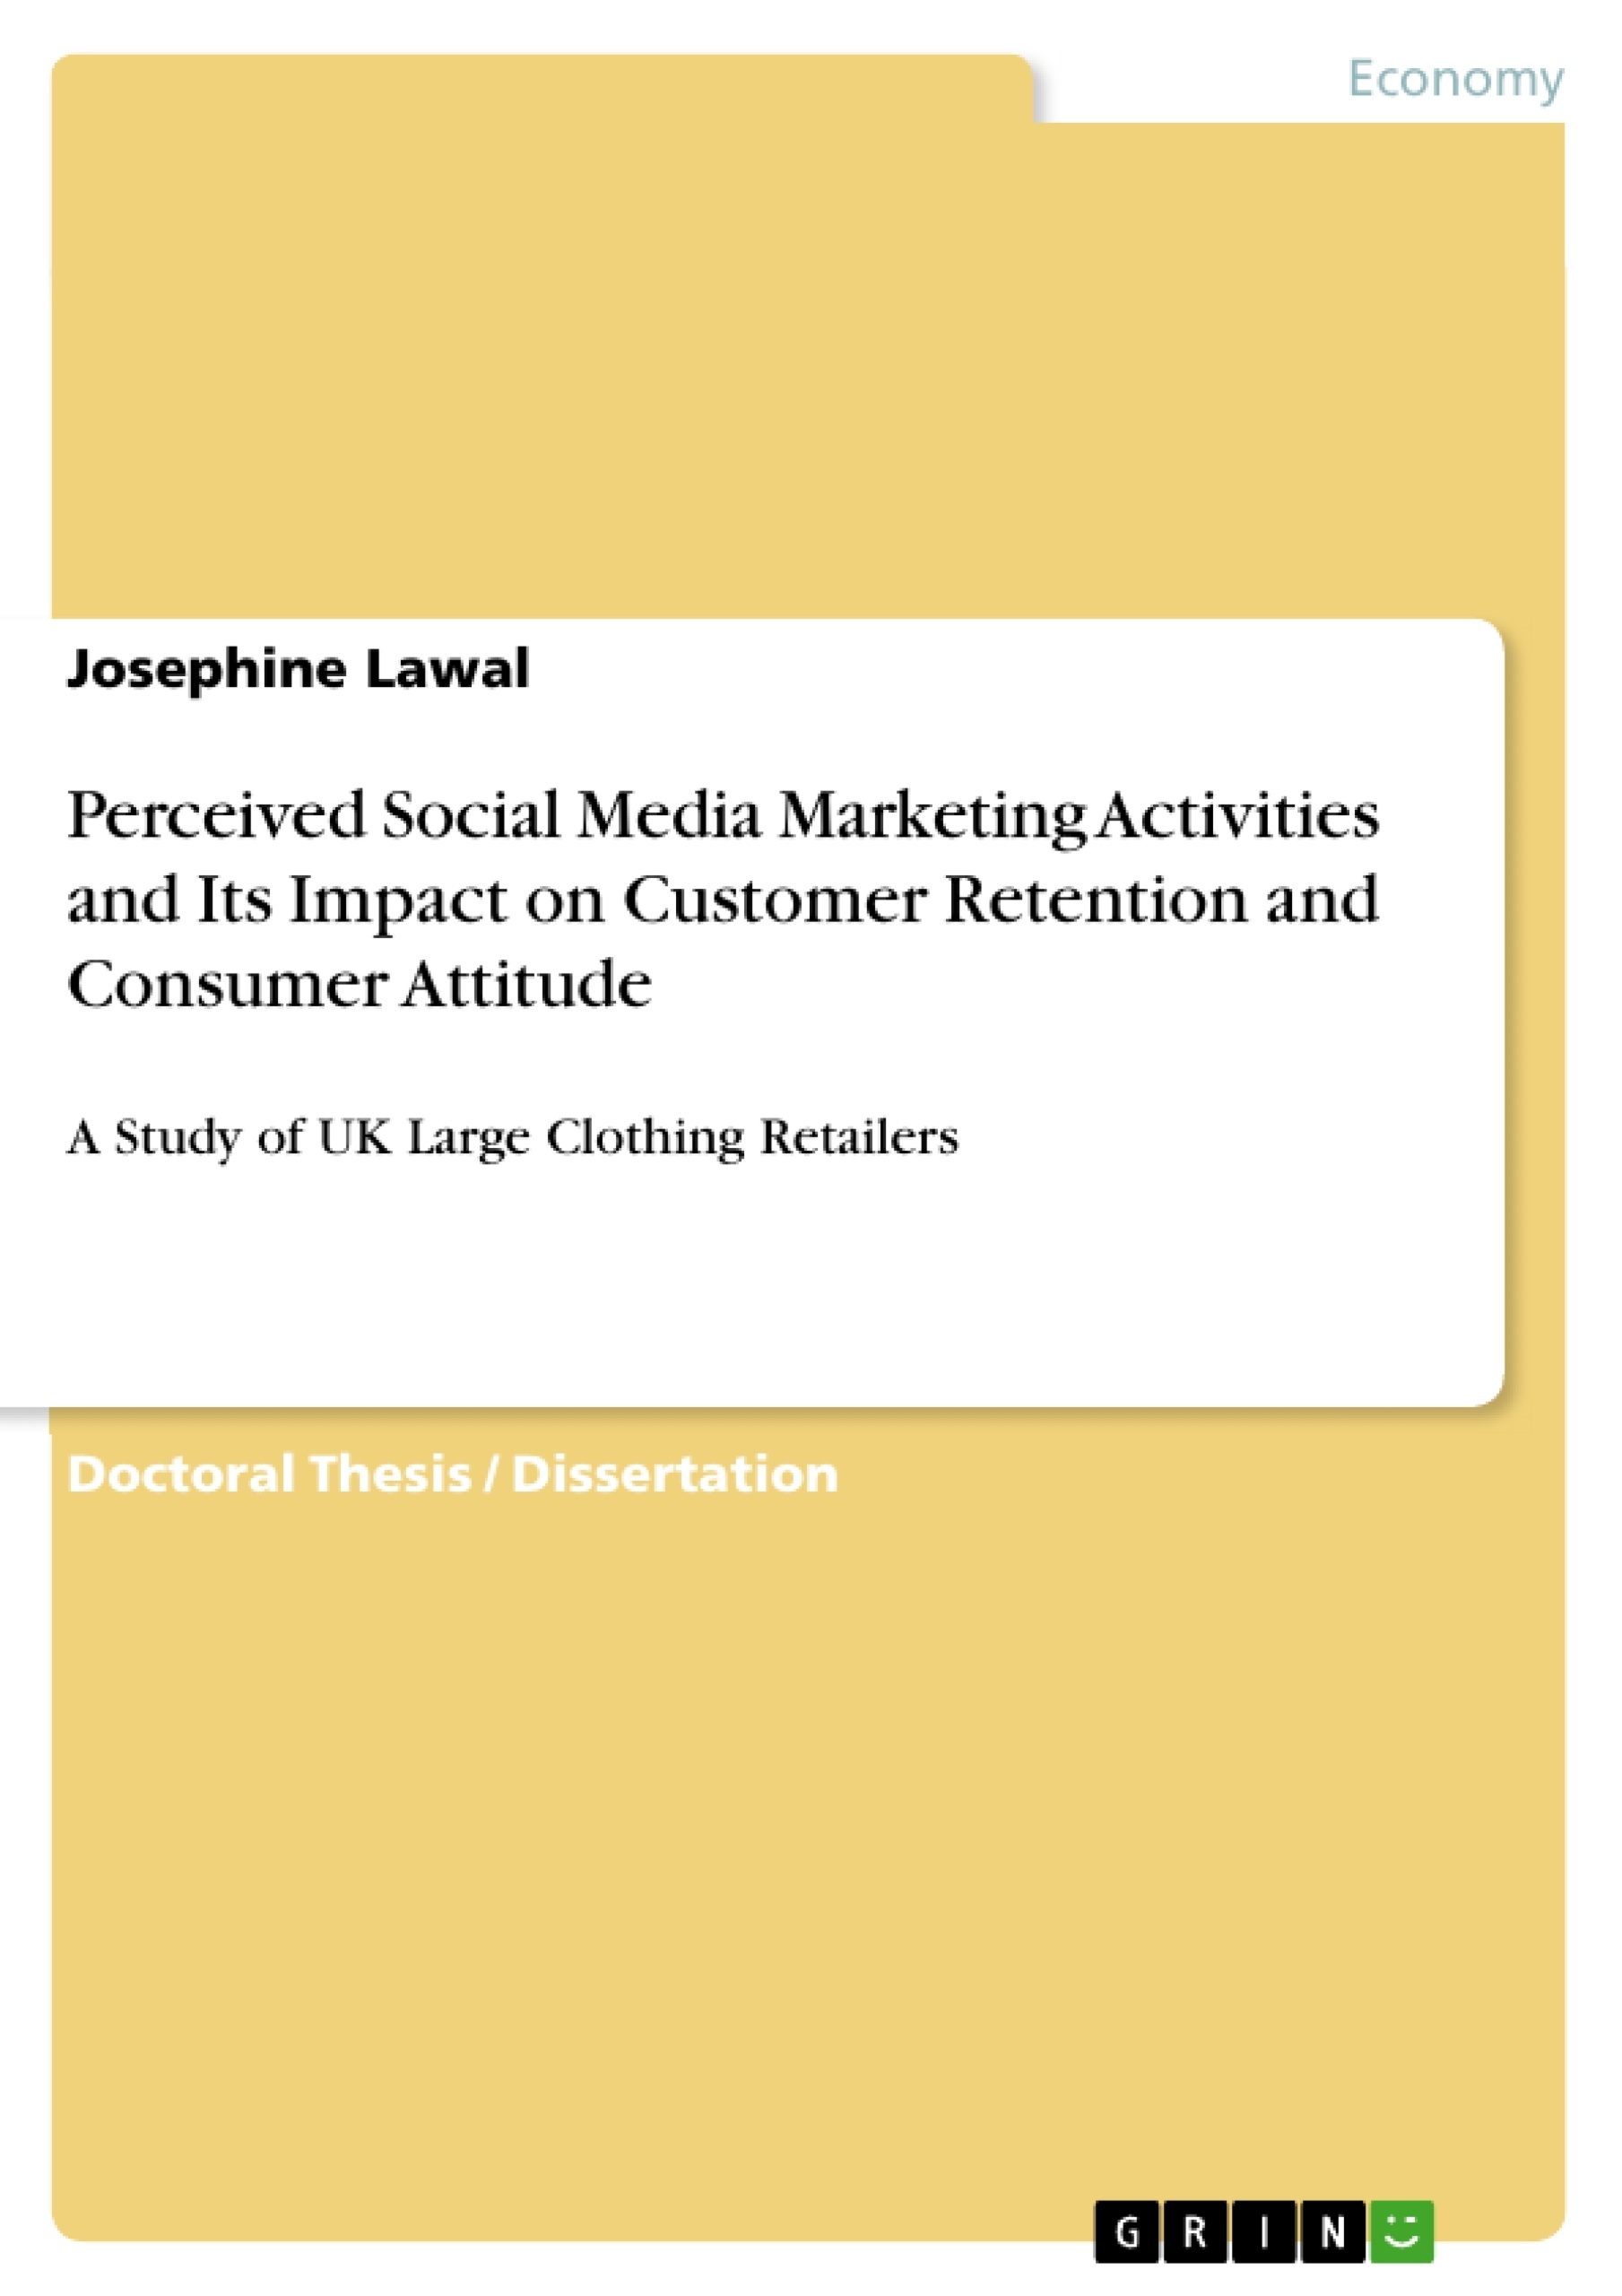 Title: Perceived Social Media Marketing Activities and Its Impact on Customer Retention and Consumer Attitude